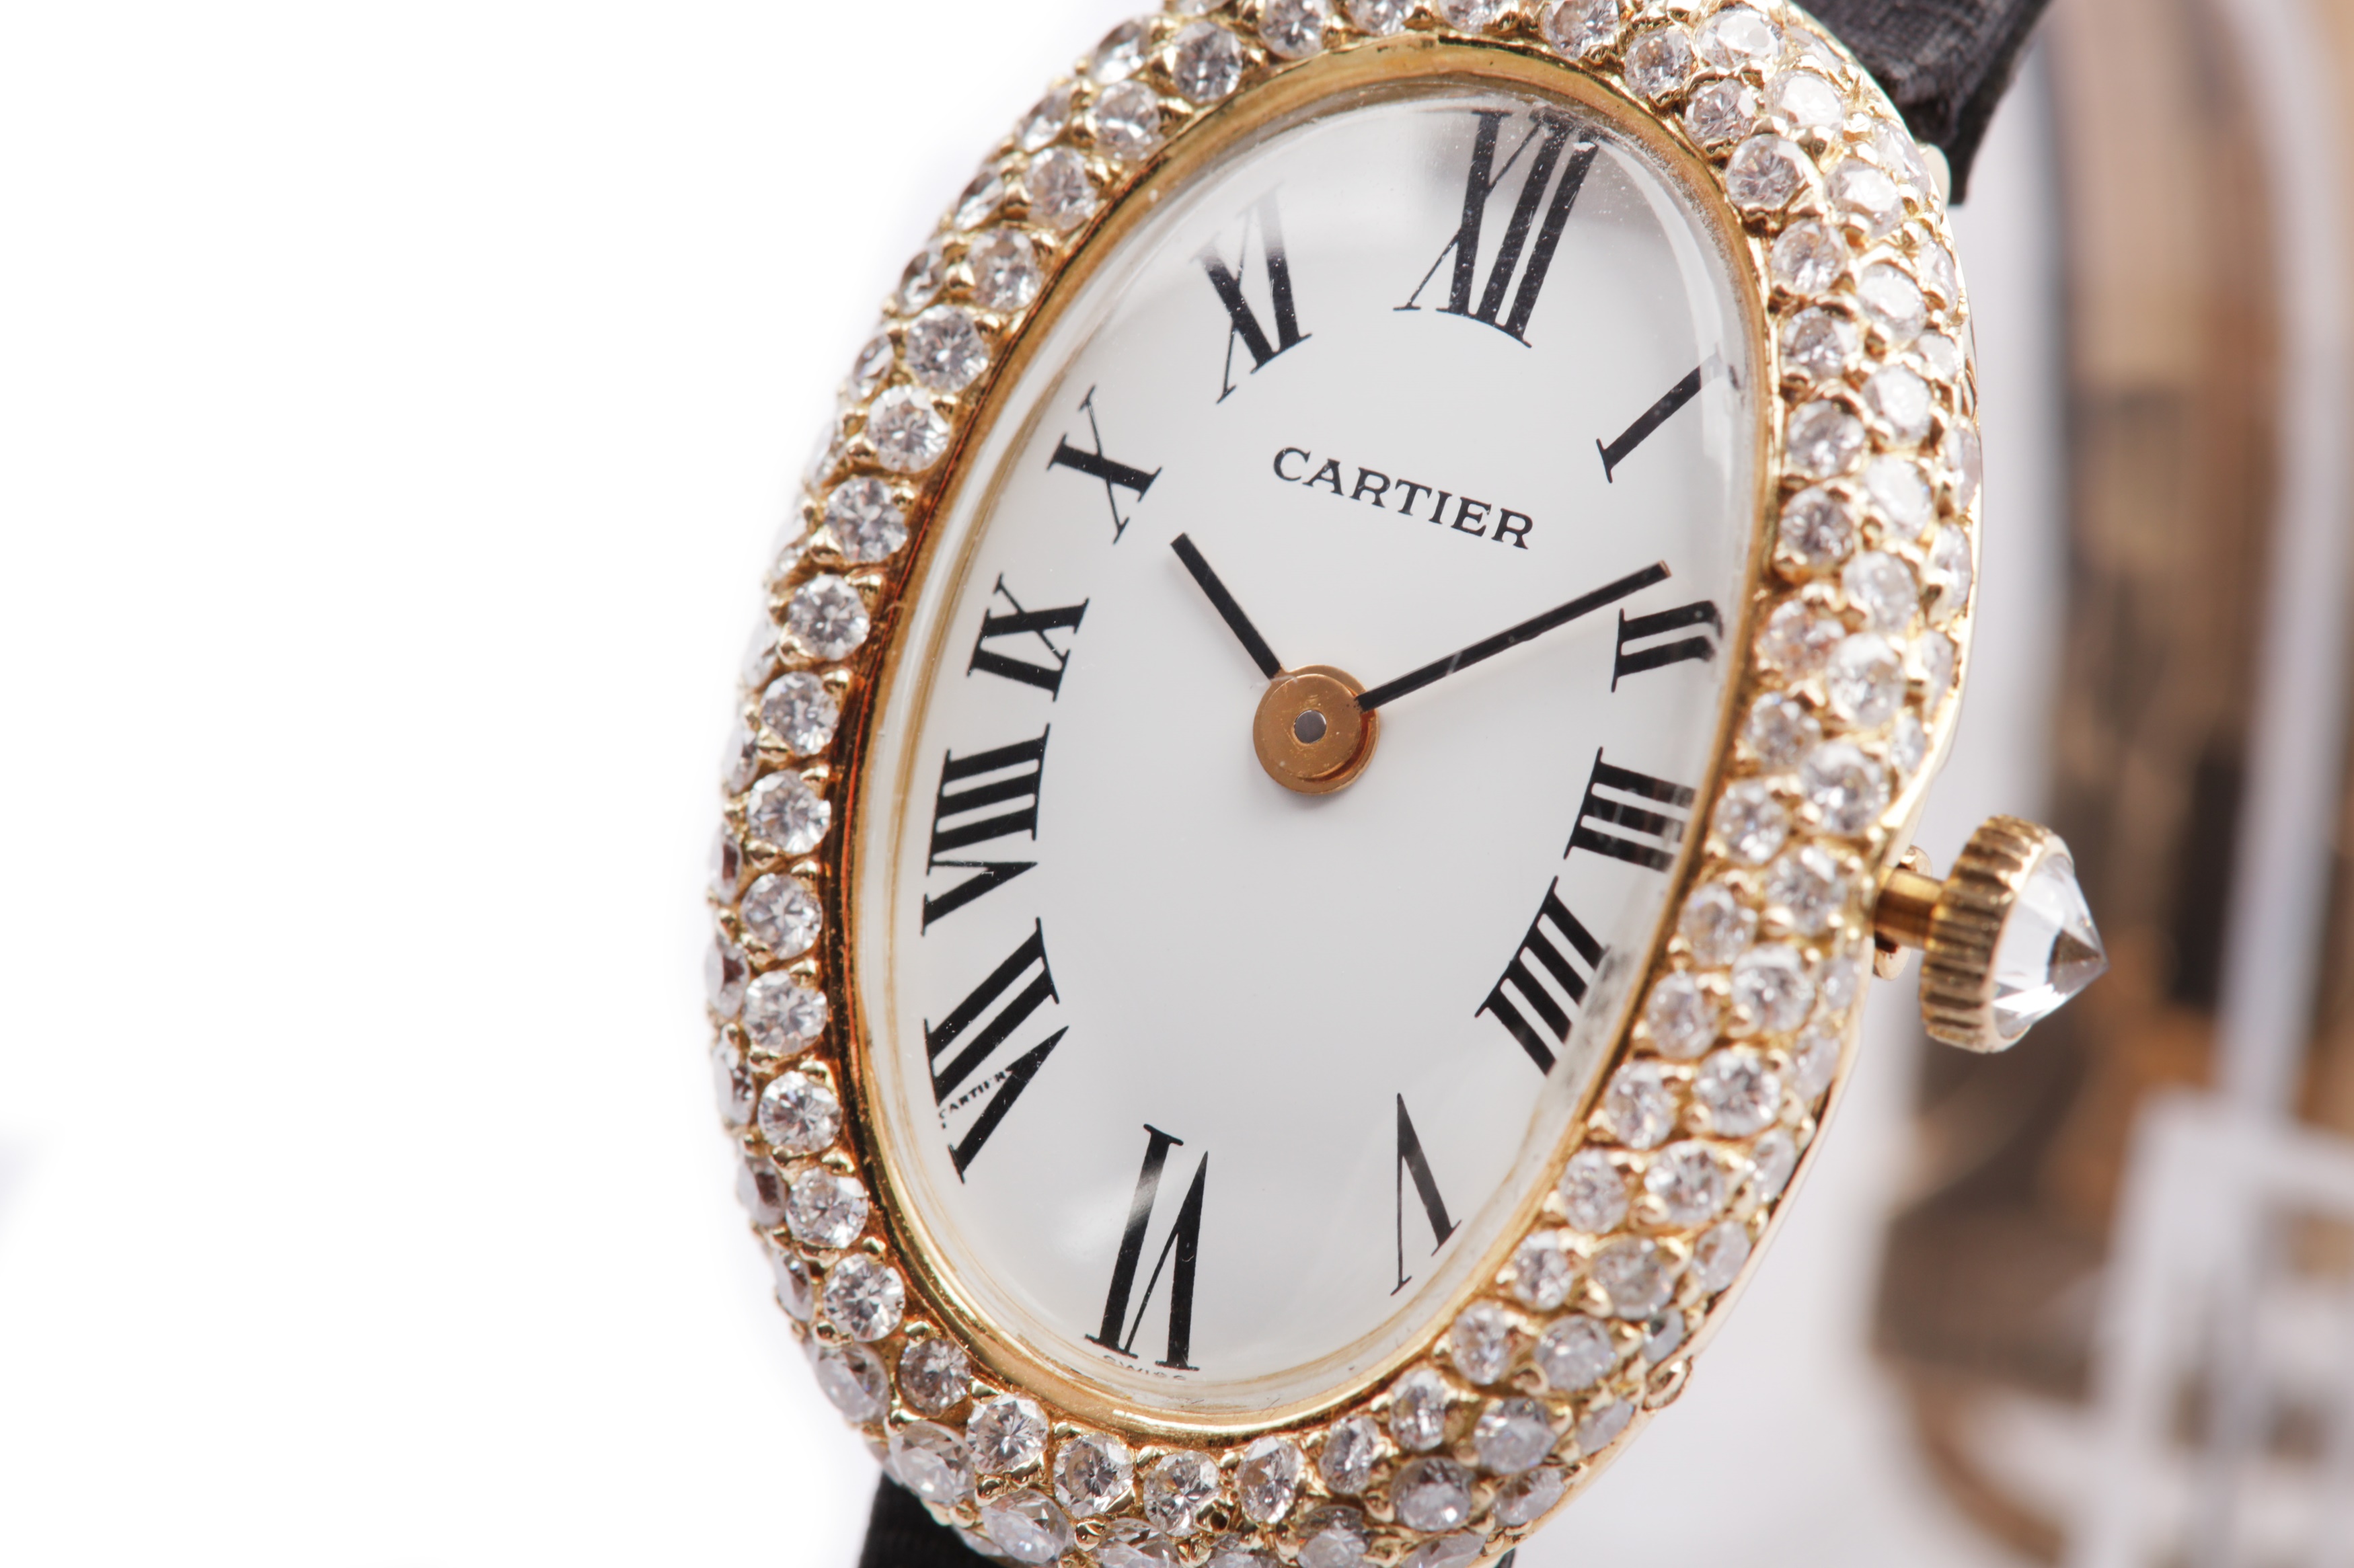 CARTIER. - Image 2 of 6